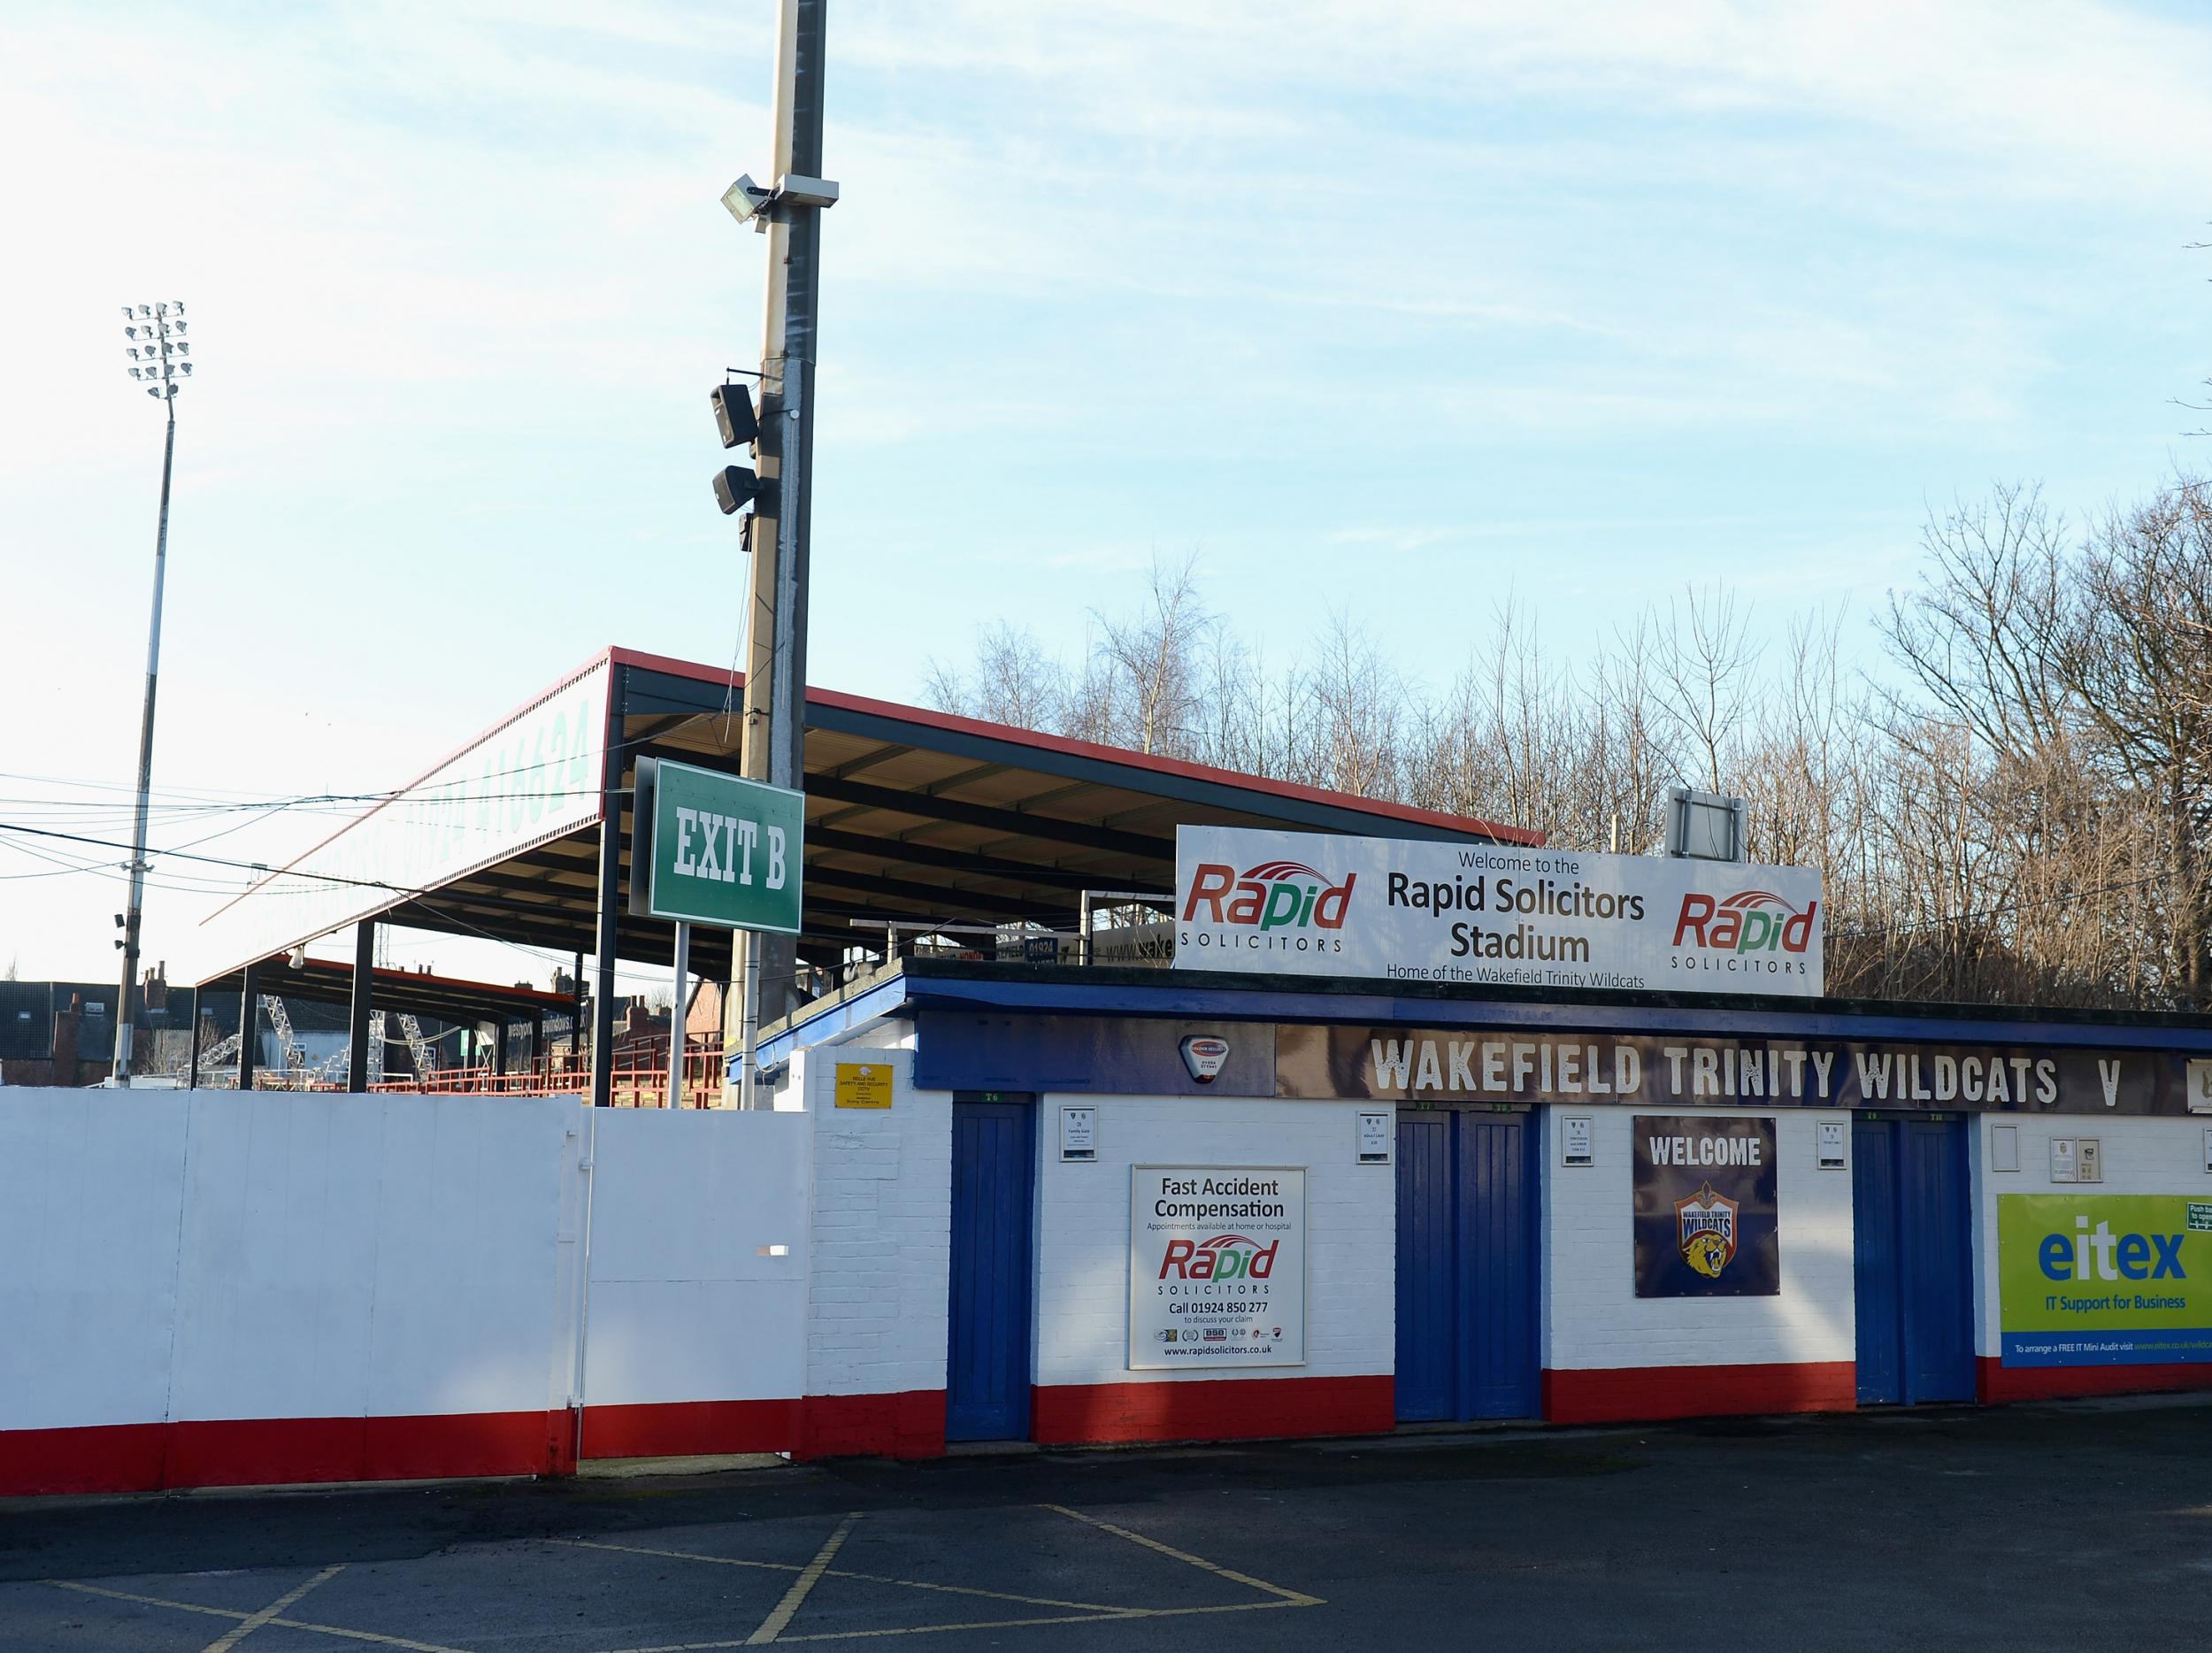 Wakefield have played on fields in the Belle Vue area since 1873